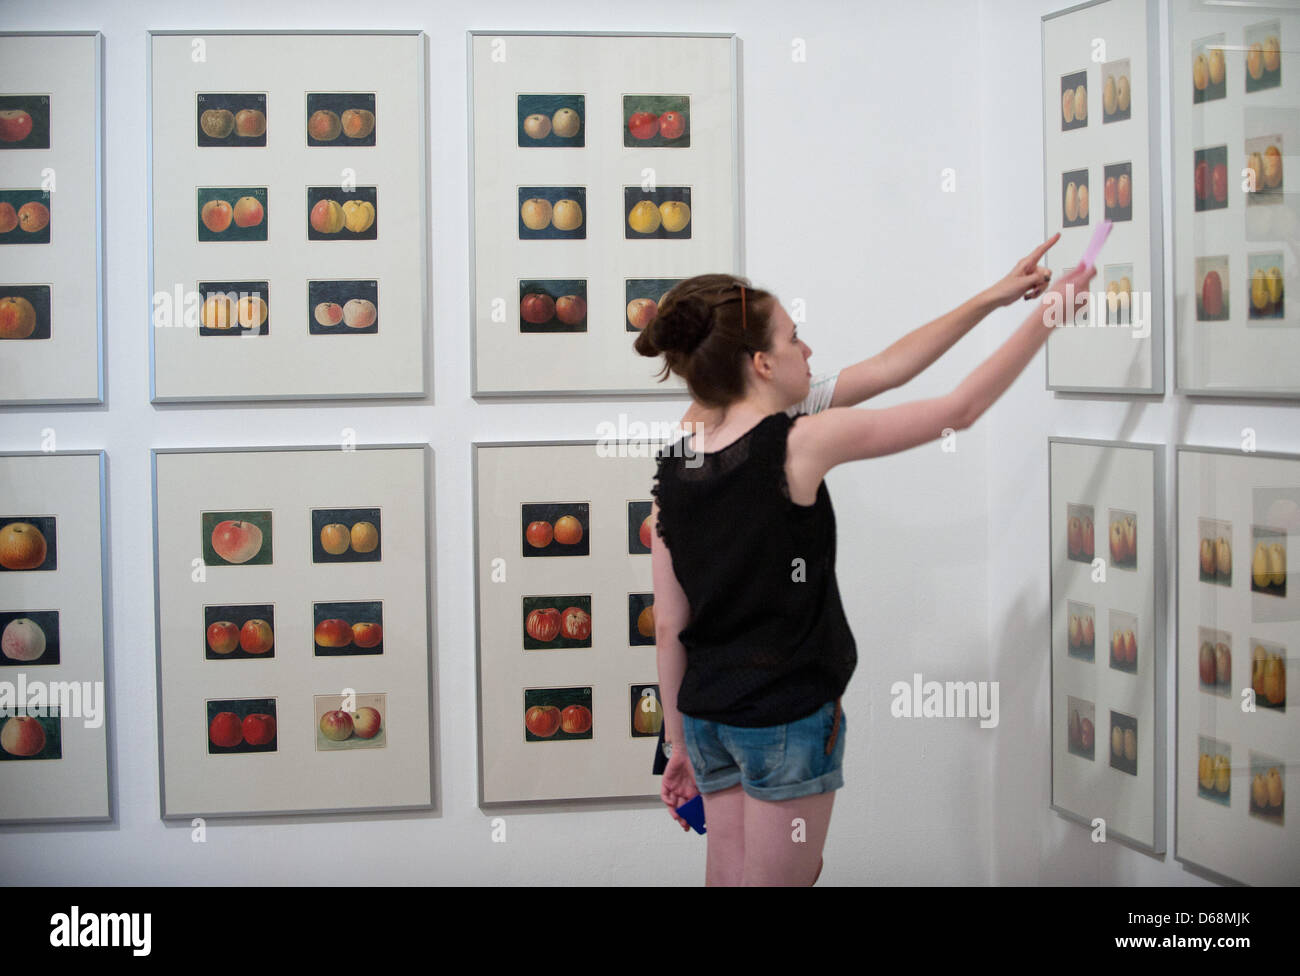 Visitors of documenta (13) observe the work 'Apples 1912-1960s' of Korbinian  Aigner, made of 372 scetches, at Museum Fridericianum in Kassel, Germany,  04 July 2012. People seeking insight into facets of contemporary